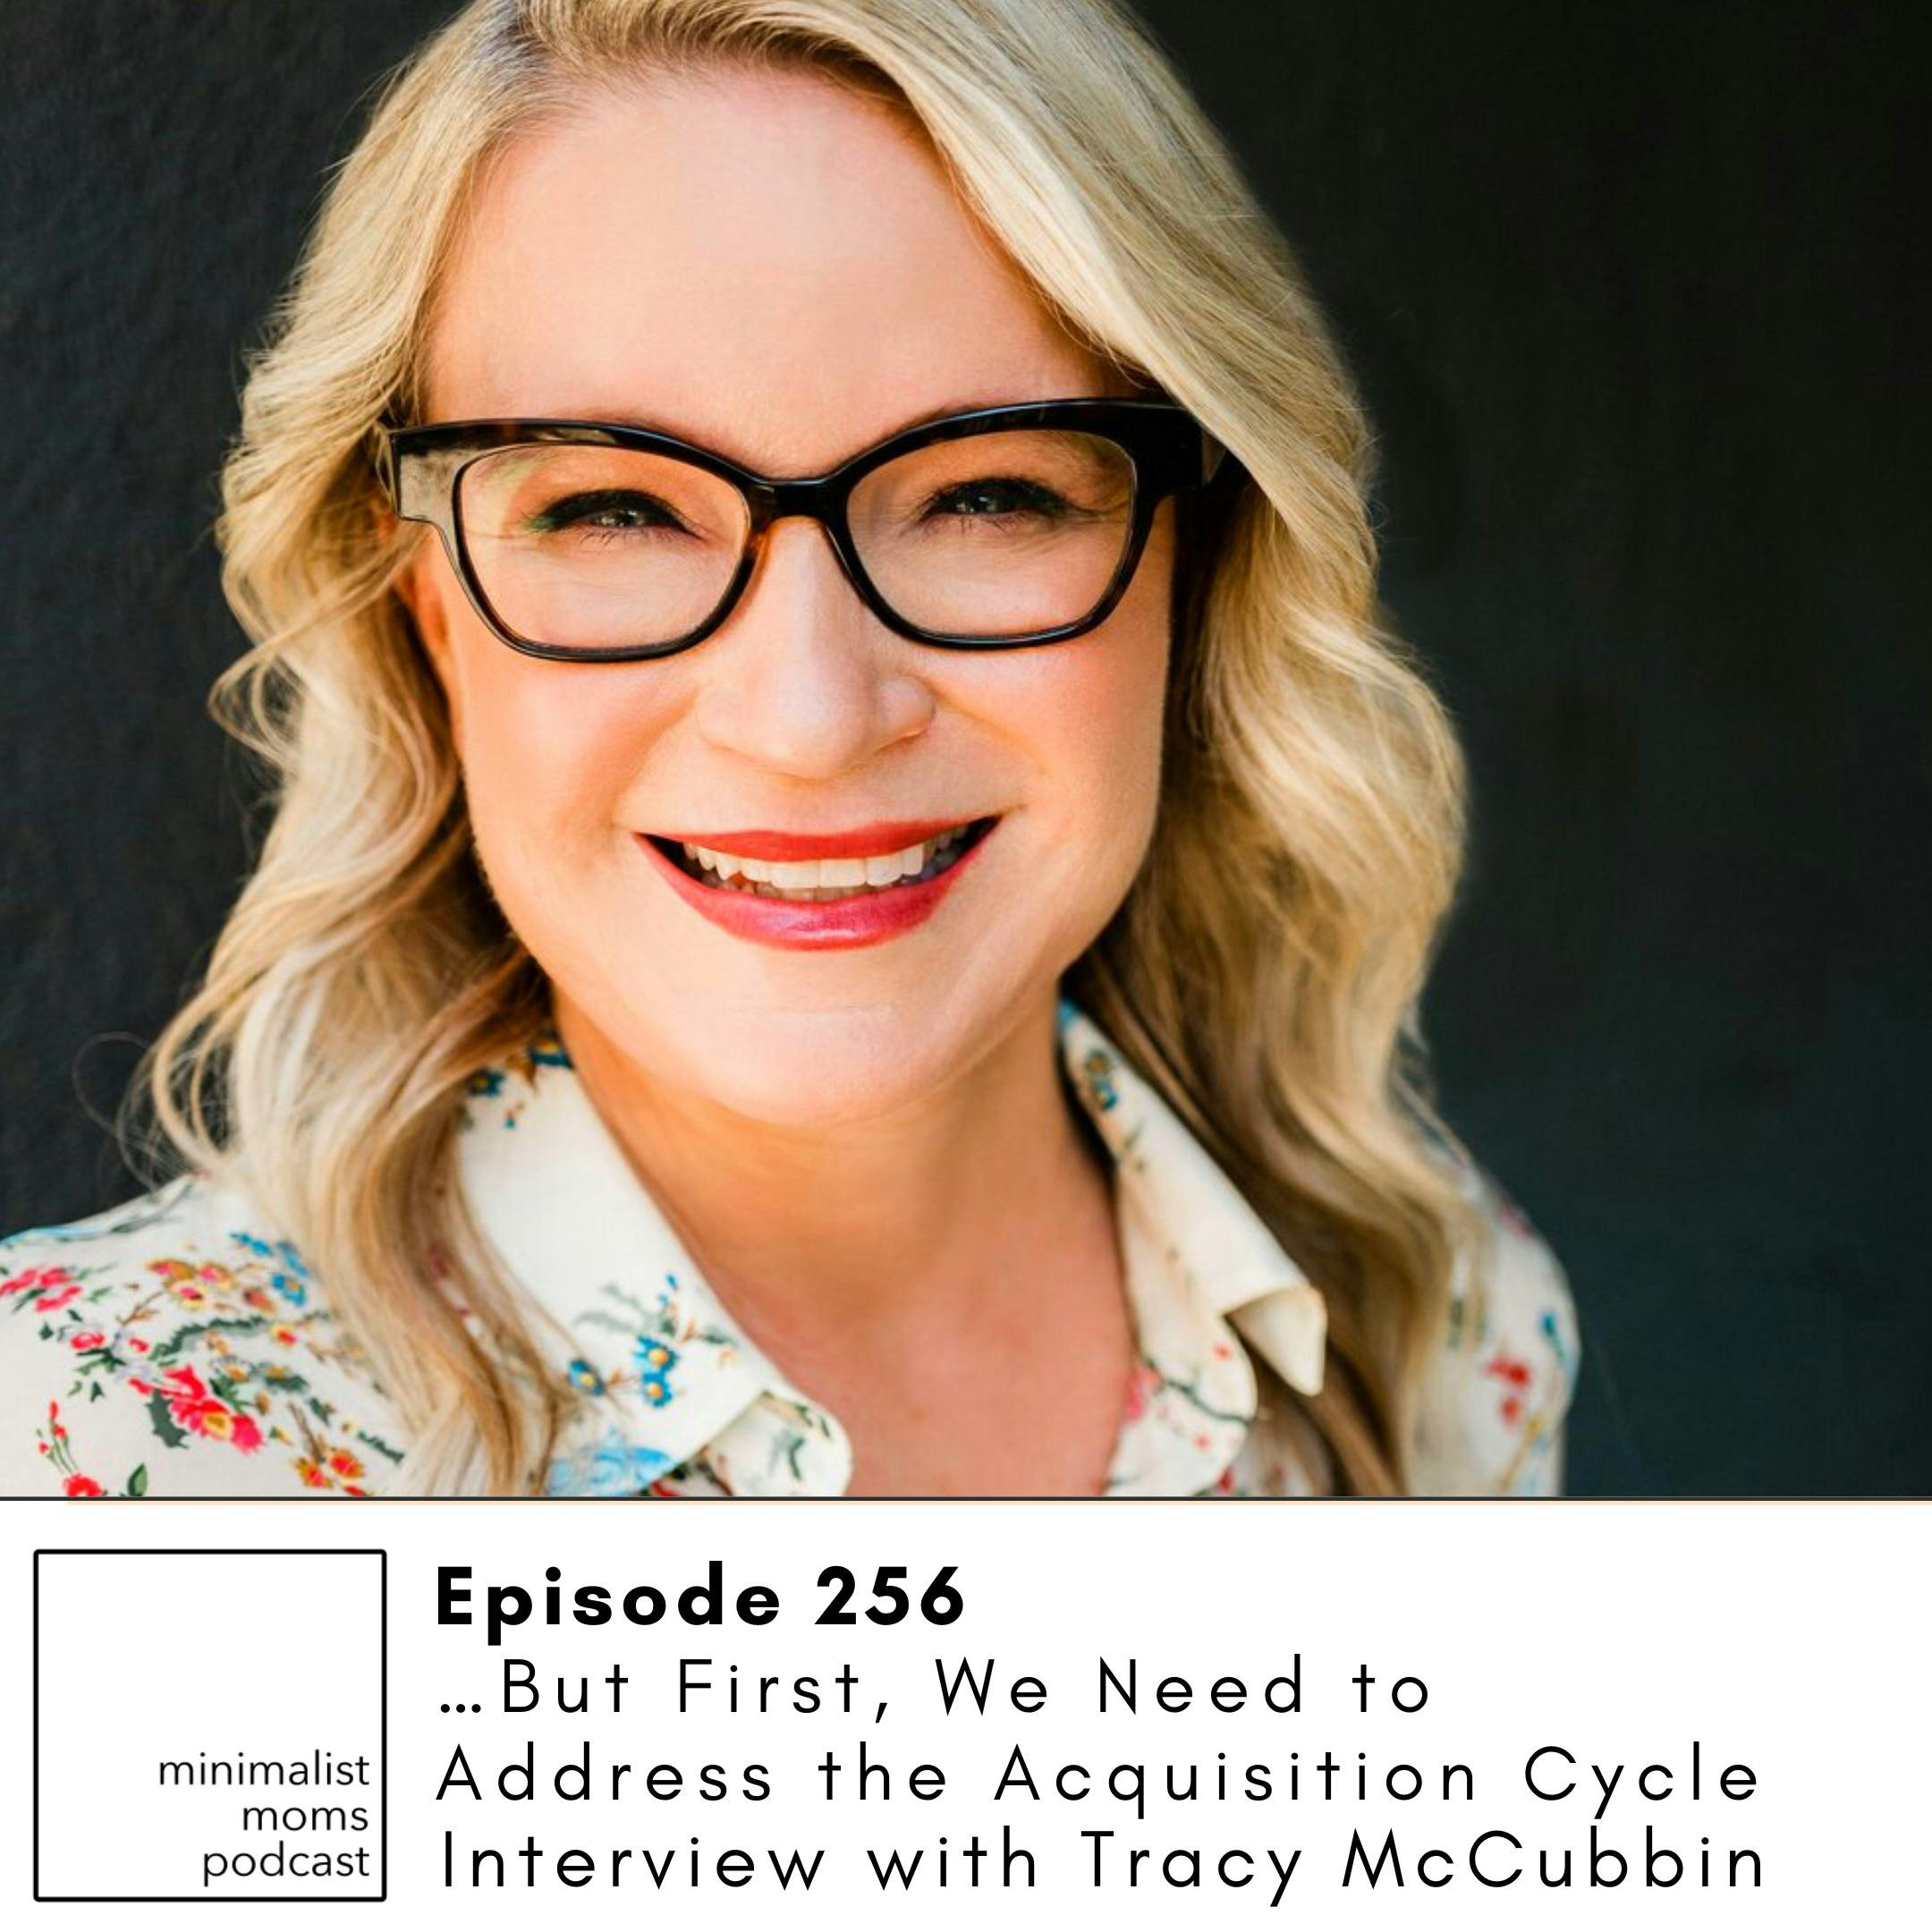 EP256: …But First, We Need to Address the Acquisition Cycle with Tracy McCubbin